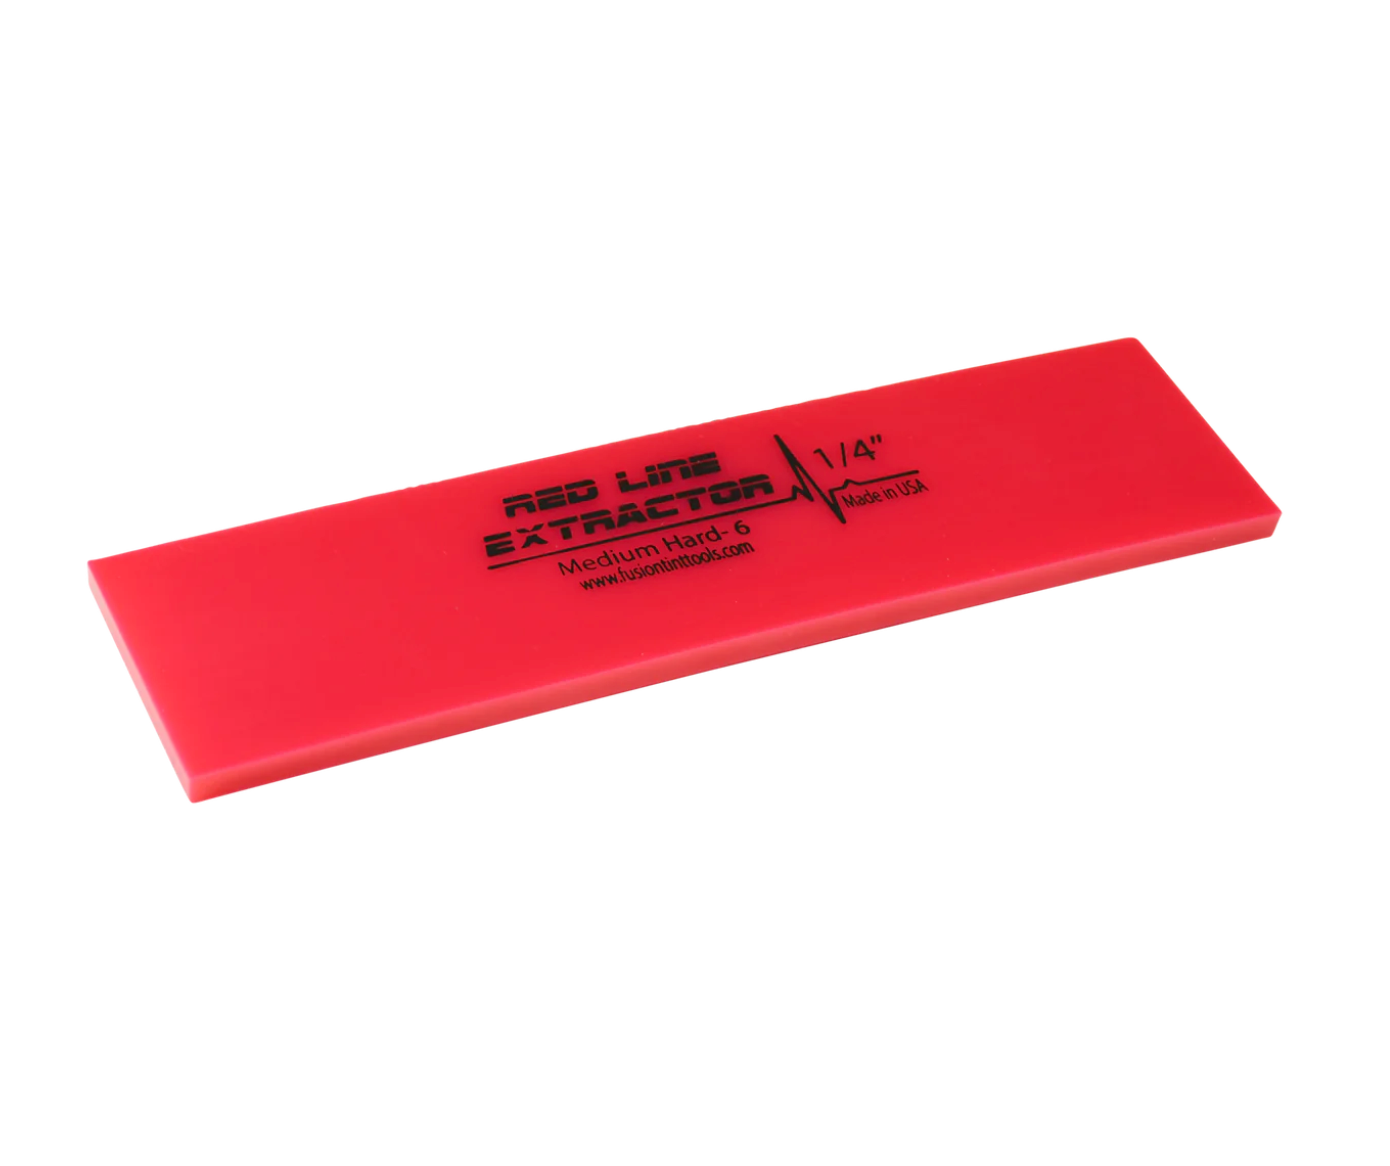 8" Red Line Extractor Squeegee Blade with NO bevels by Fusion Tools